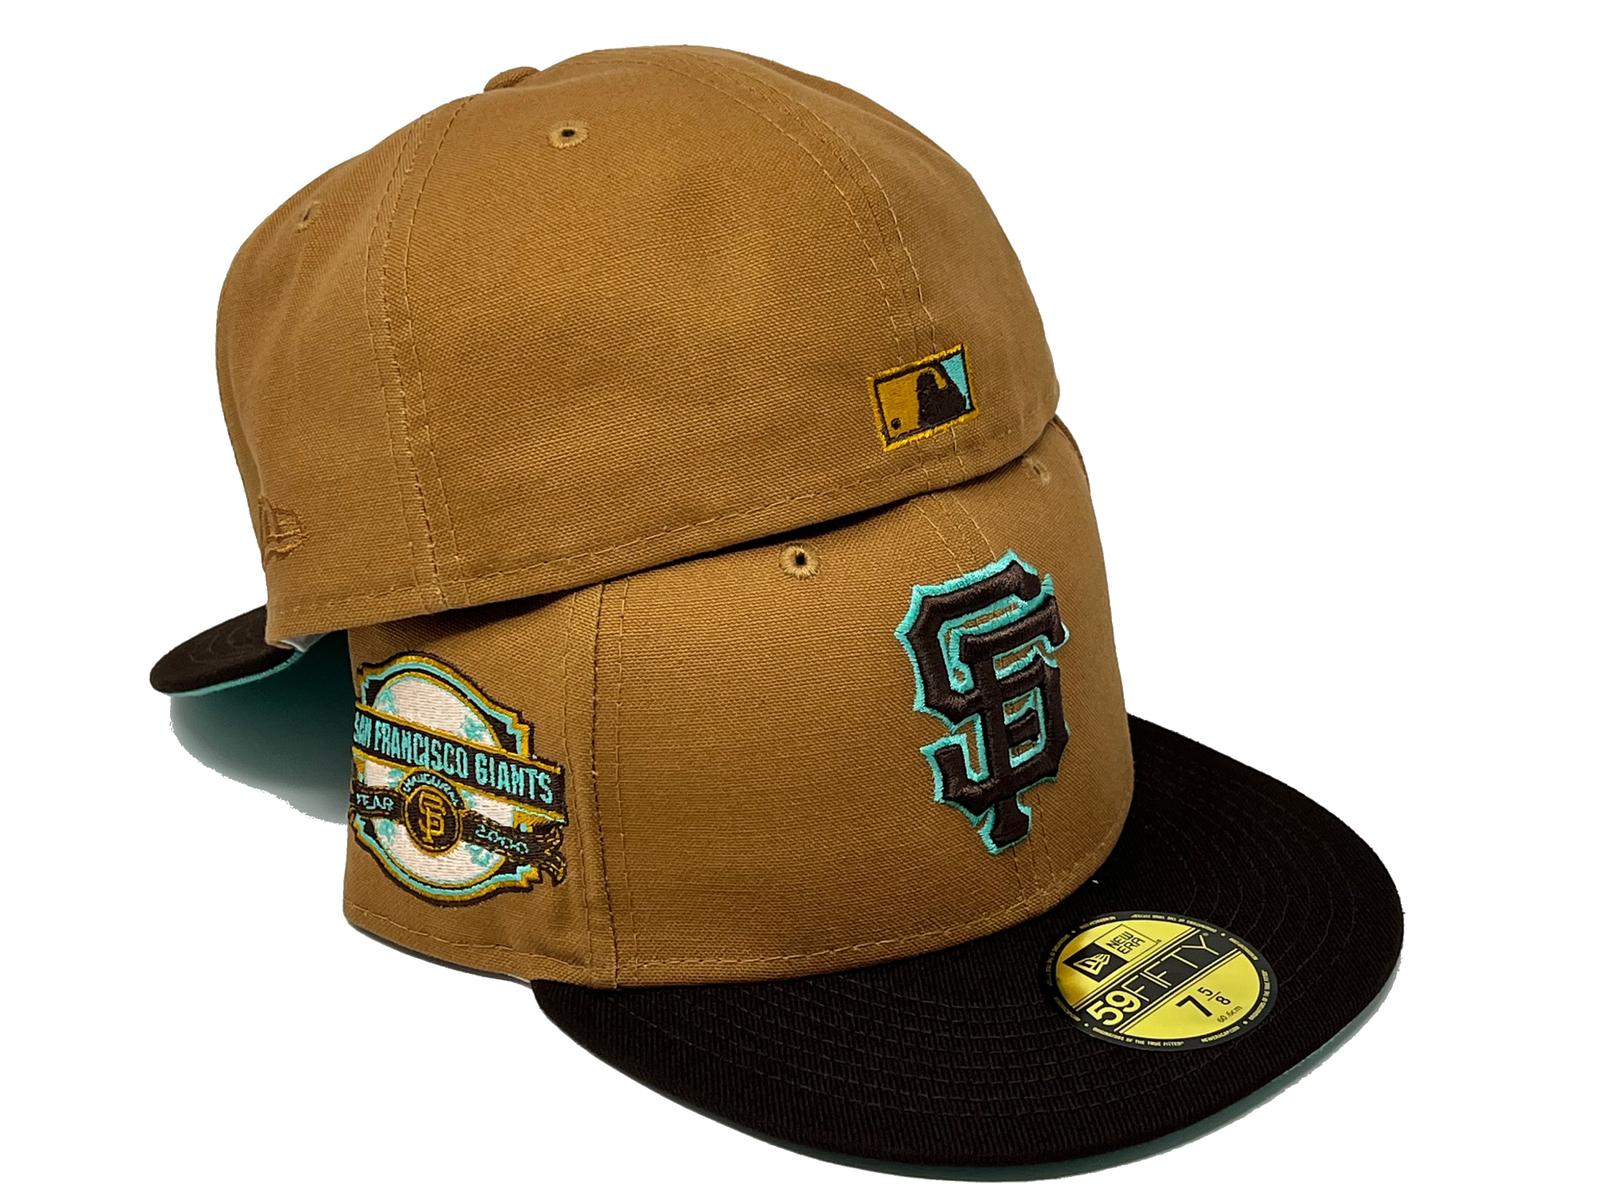 Our Muni inspired SF Giants New Era cap in brown/orange available in-store  and online. #ShopUP #upperplayground #muni #s…